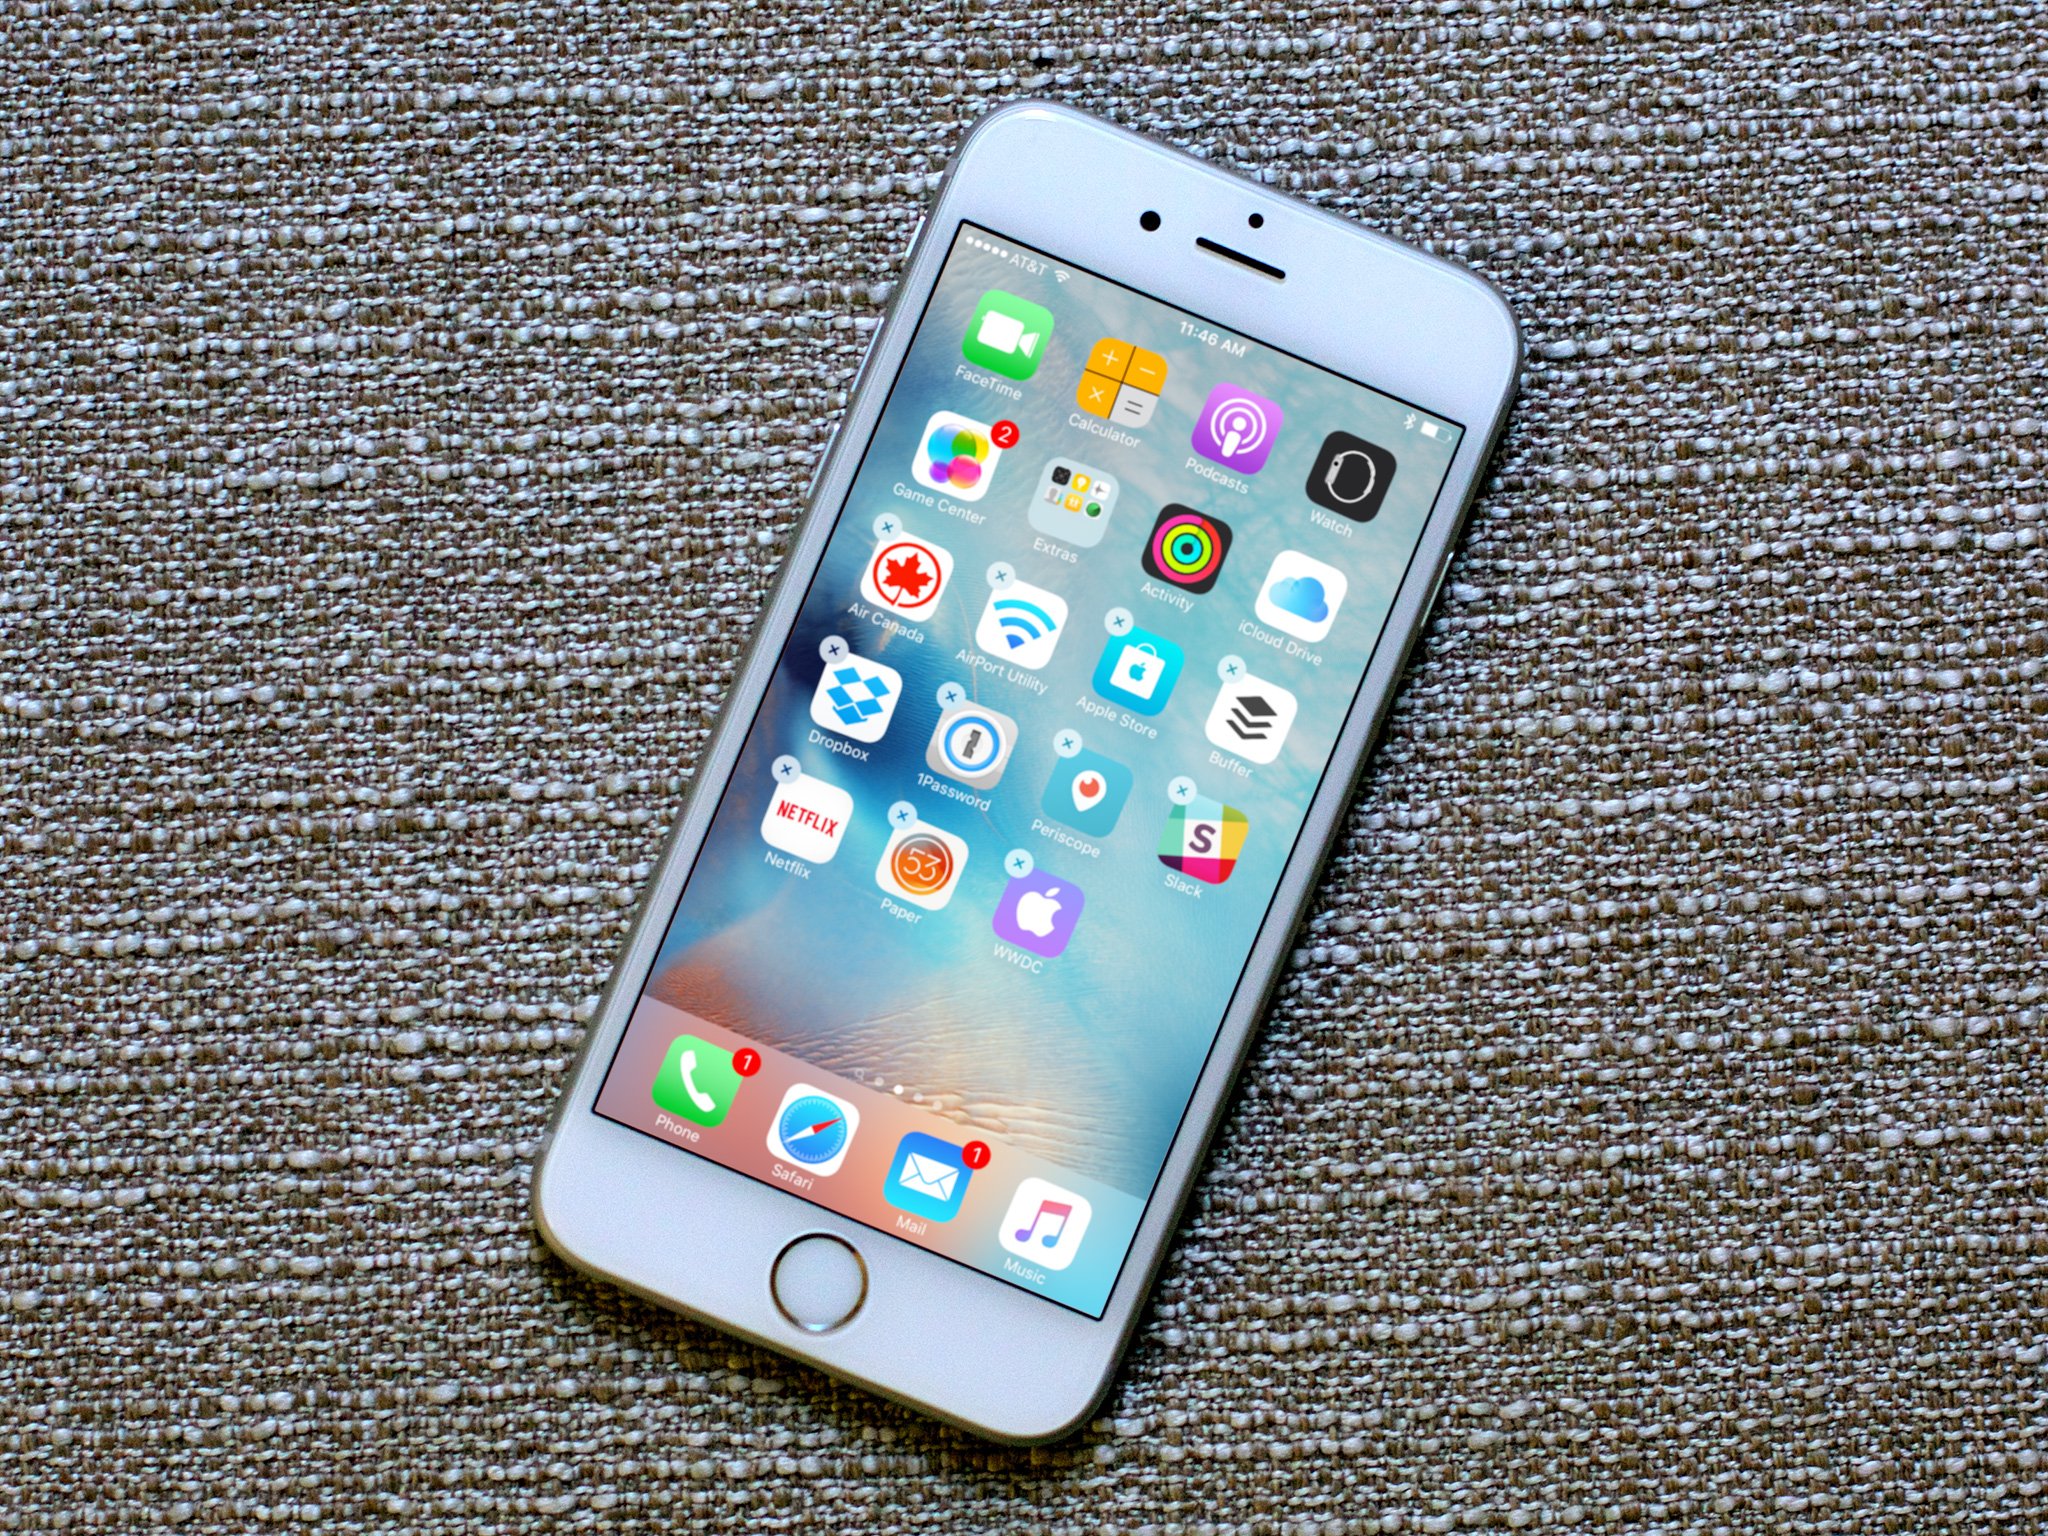 How to Move Apps on New iPhone 6s / 7 